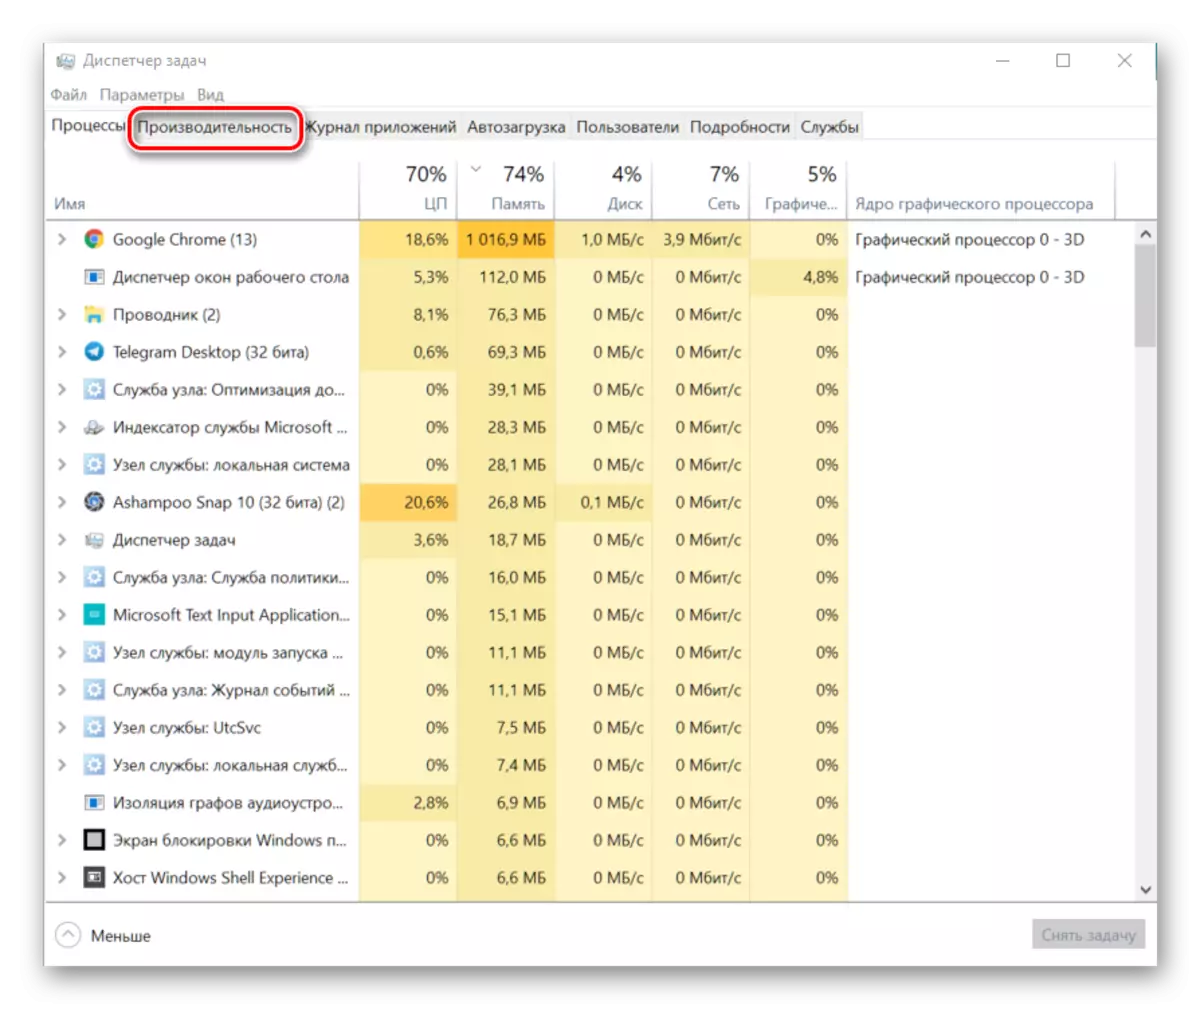 Go to the Performance tab in the Task Manager